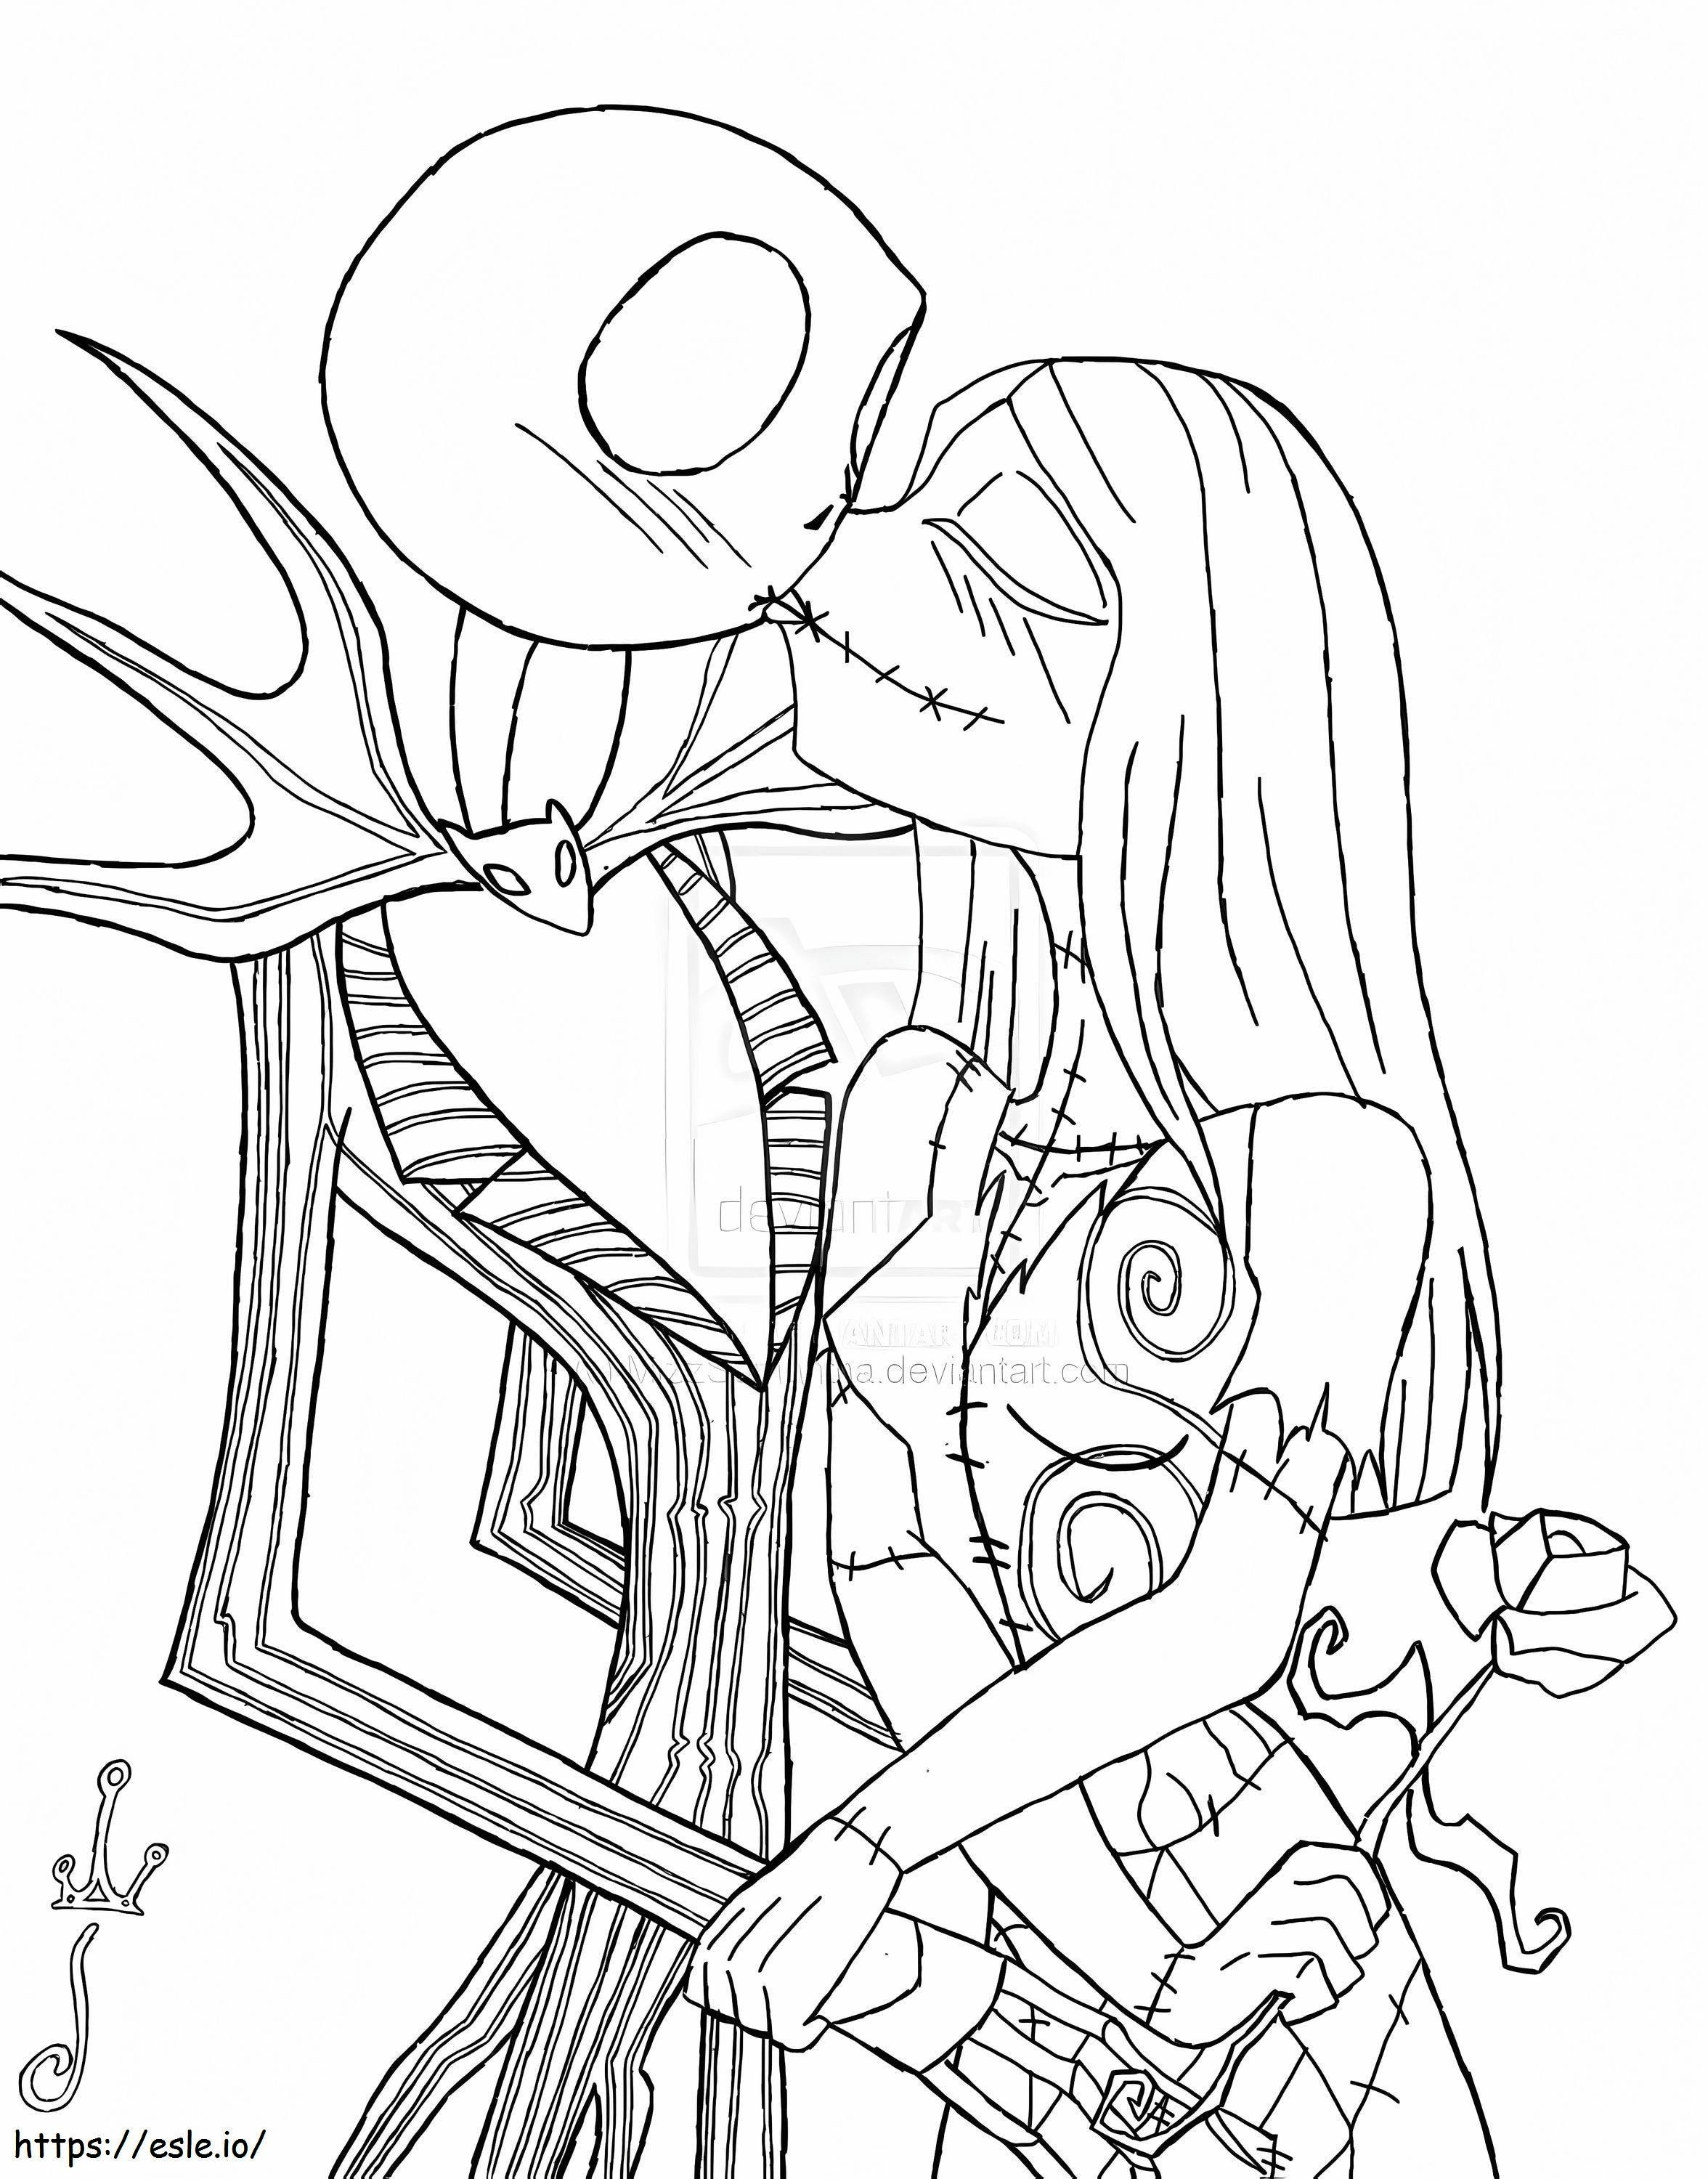 1575077989 Extraordinary Jack Picture Ideas Nightmare Before coloring page